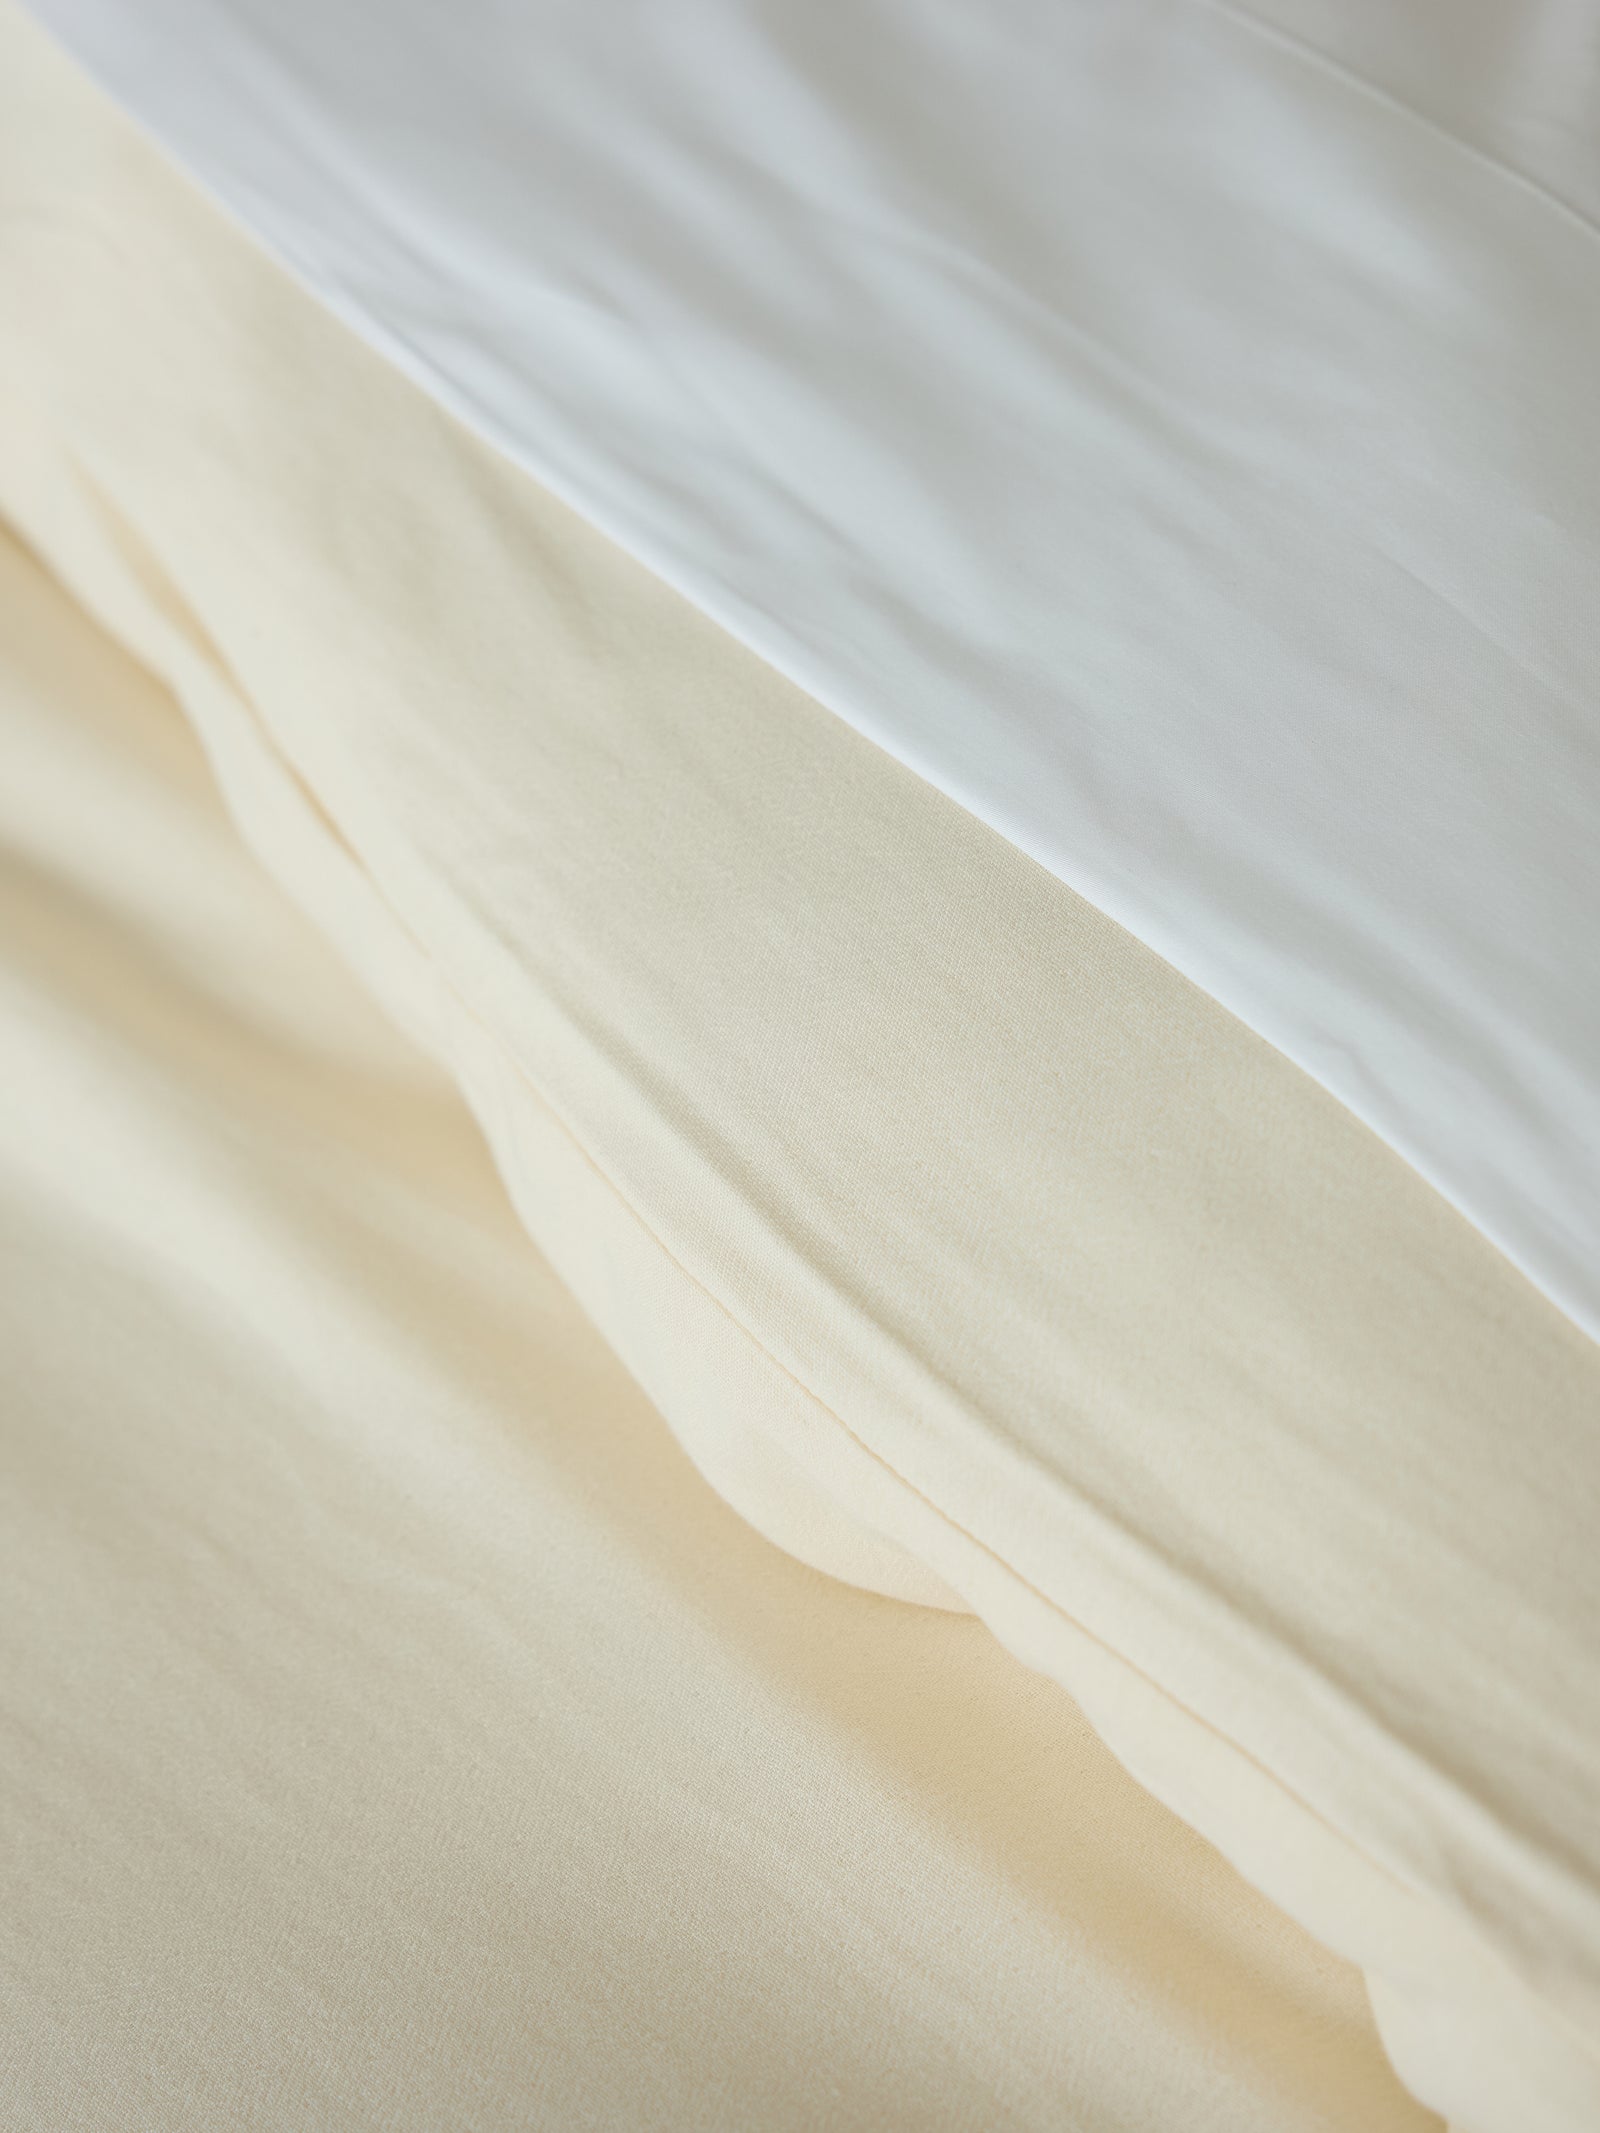 Buttermilk Aire Bamboo Duvet Cover. The Duvet Cover has been photographed on a bed in a home bedroom.